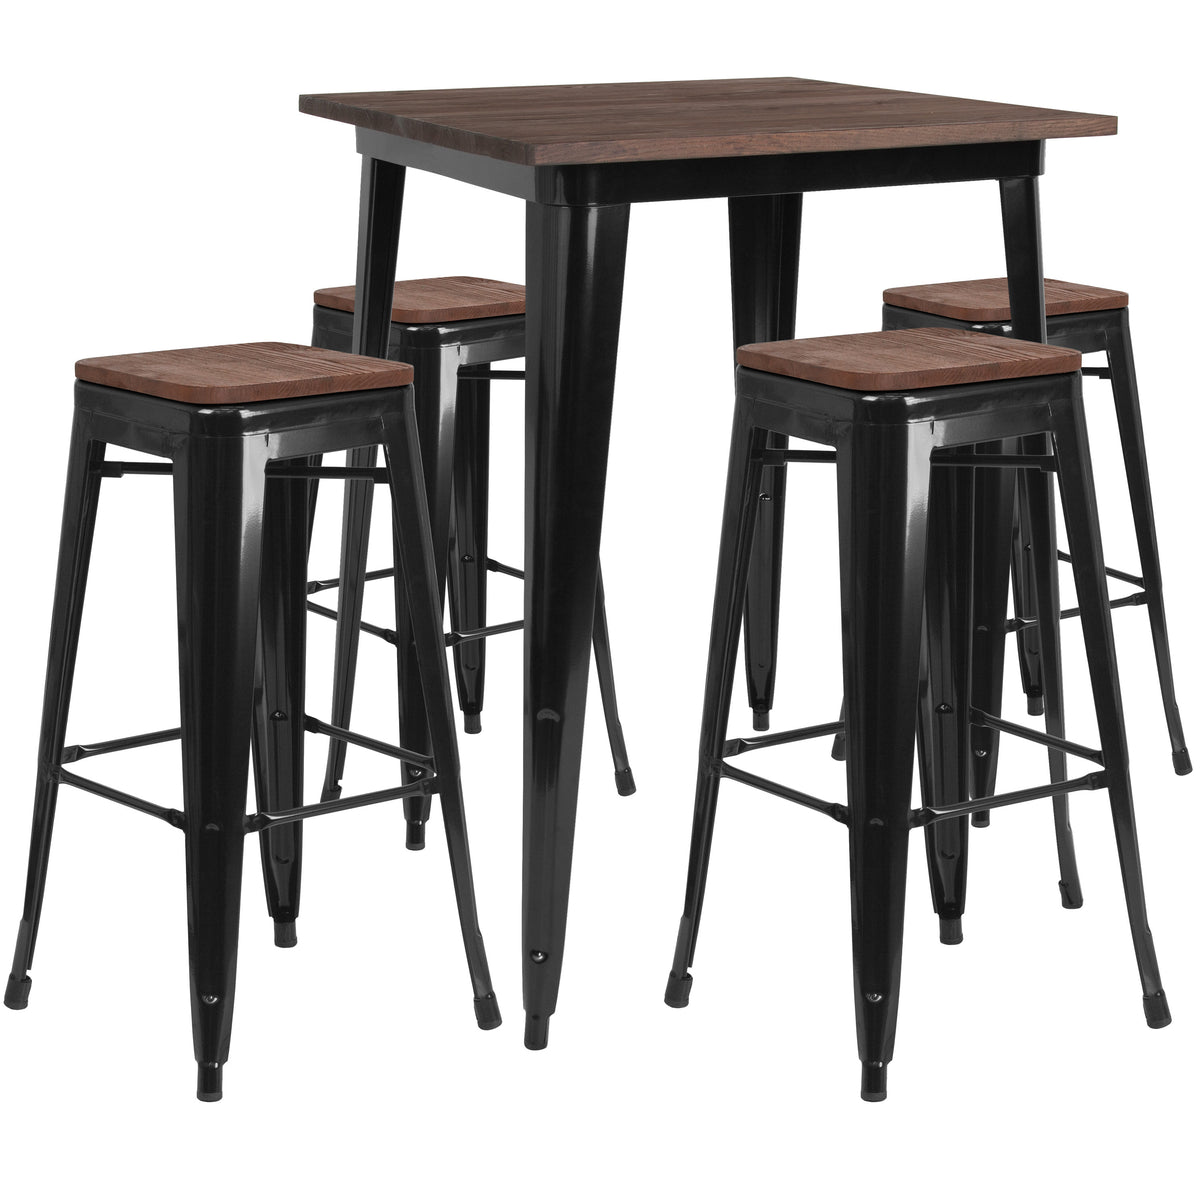 Black |#| 31.5inch Square Black Metal Bar Table Set with Wood Top and 4 Backless Stools